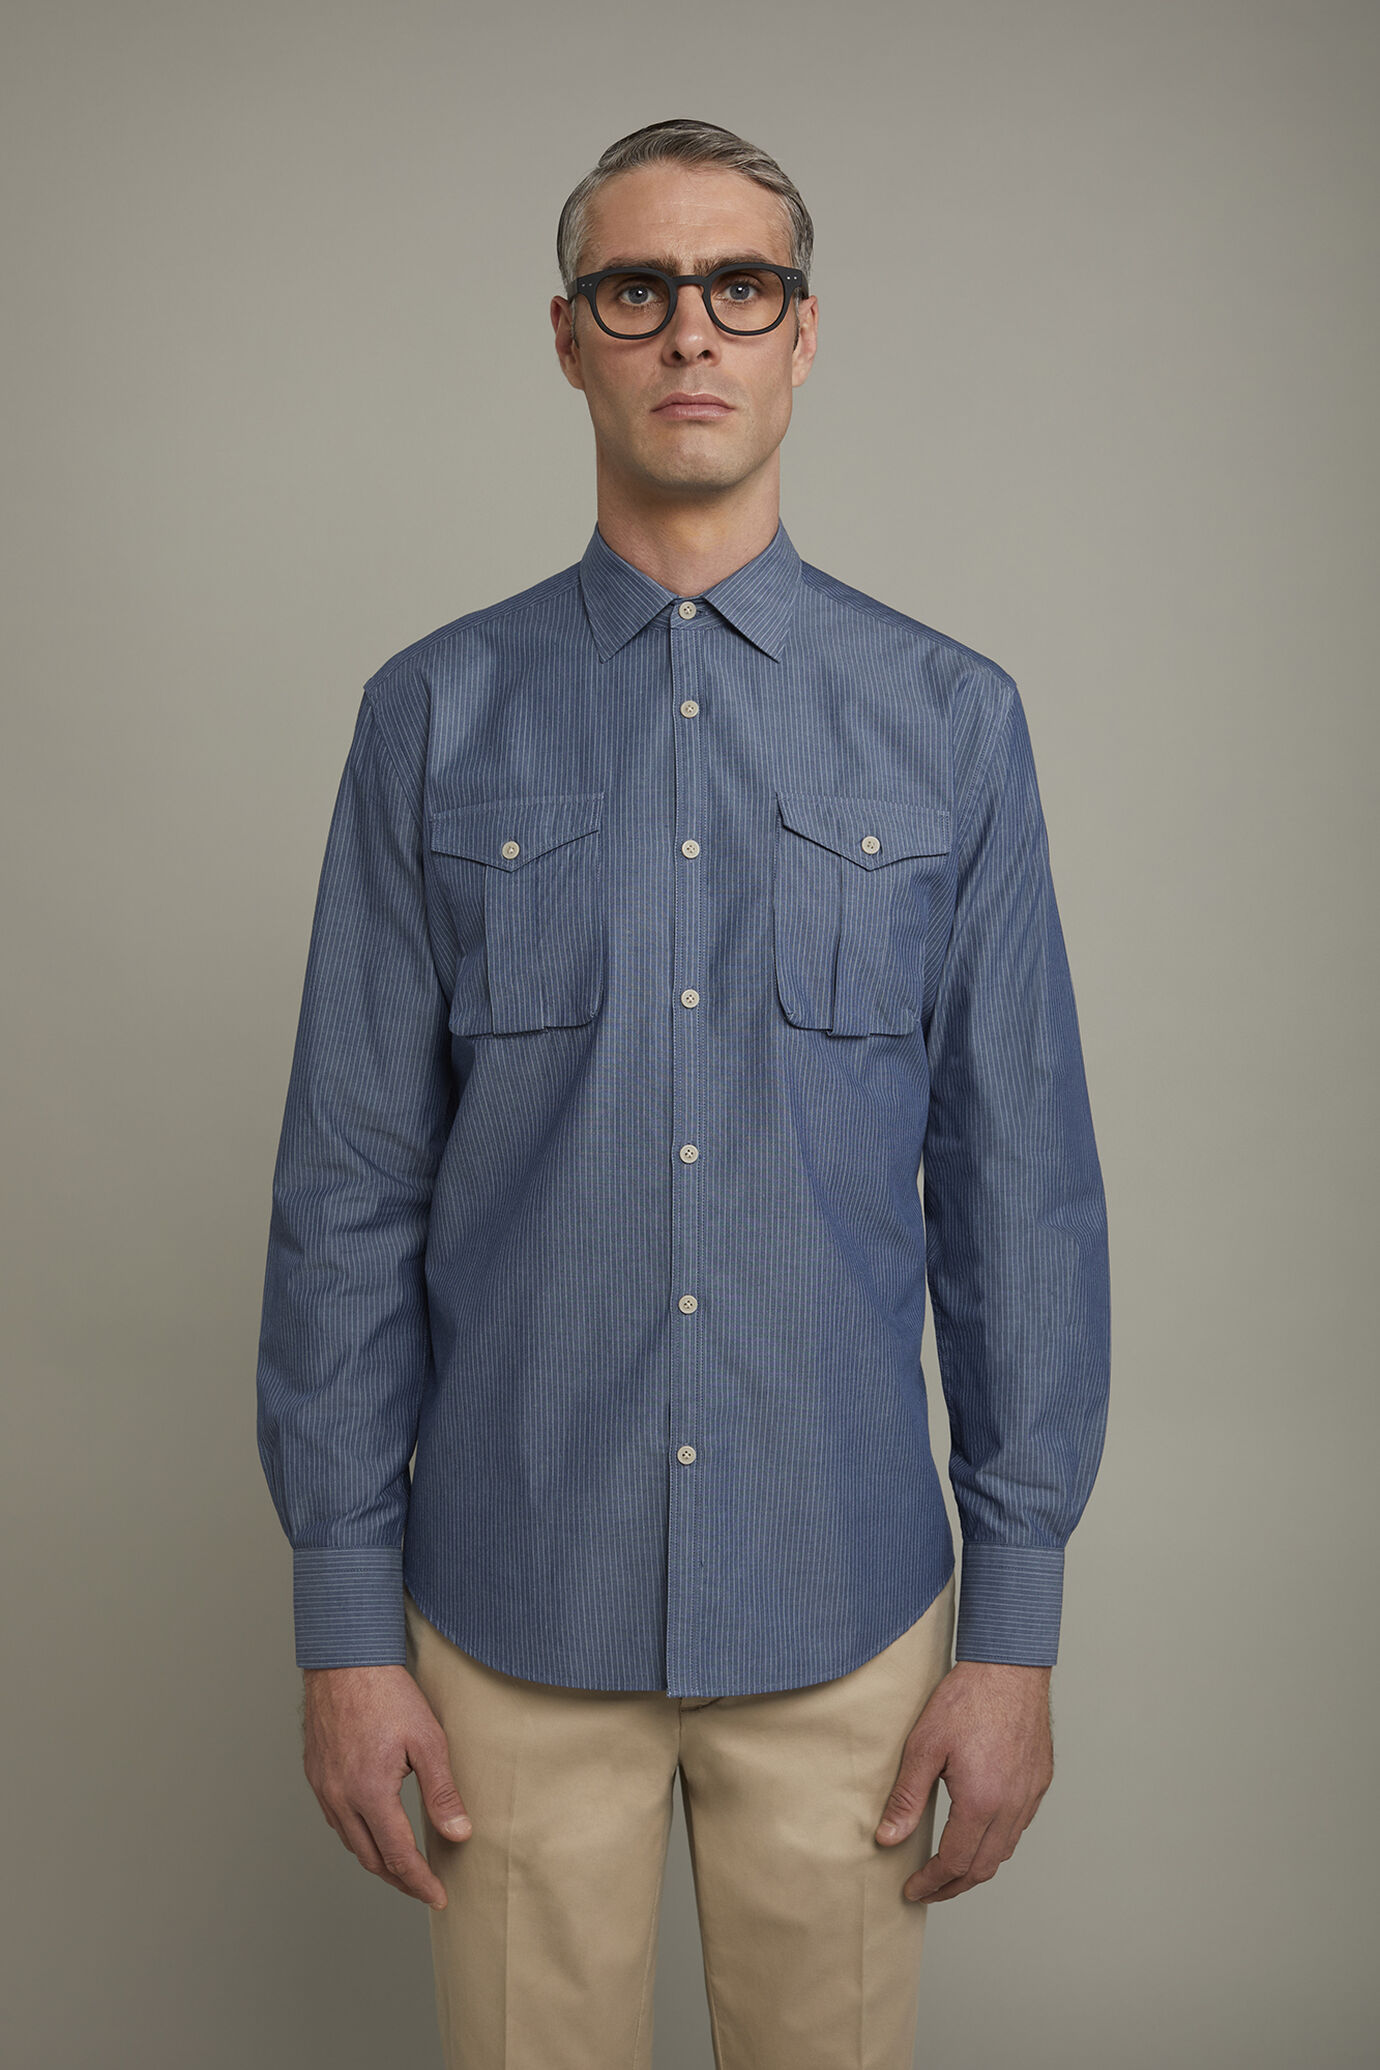 Men’s casual shirt with classic collar 100% cotton pinstriped fabric in denim comfort fit